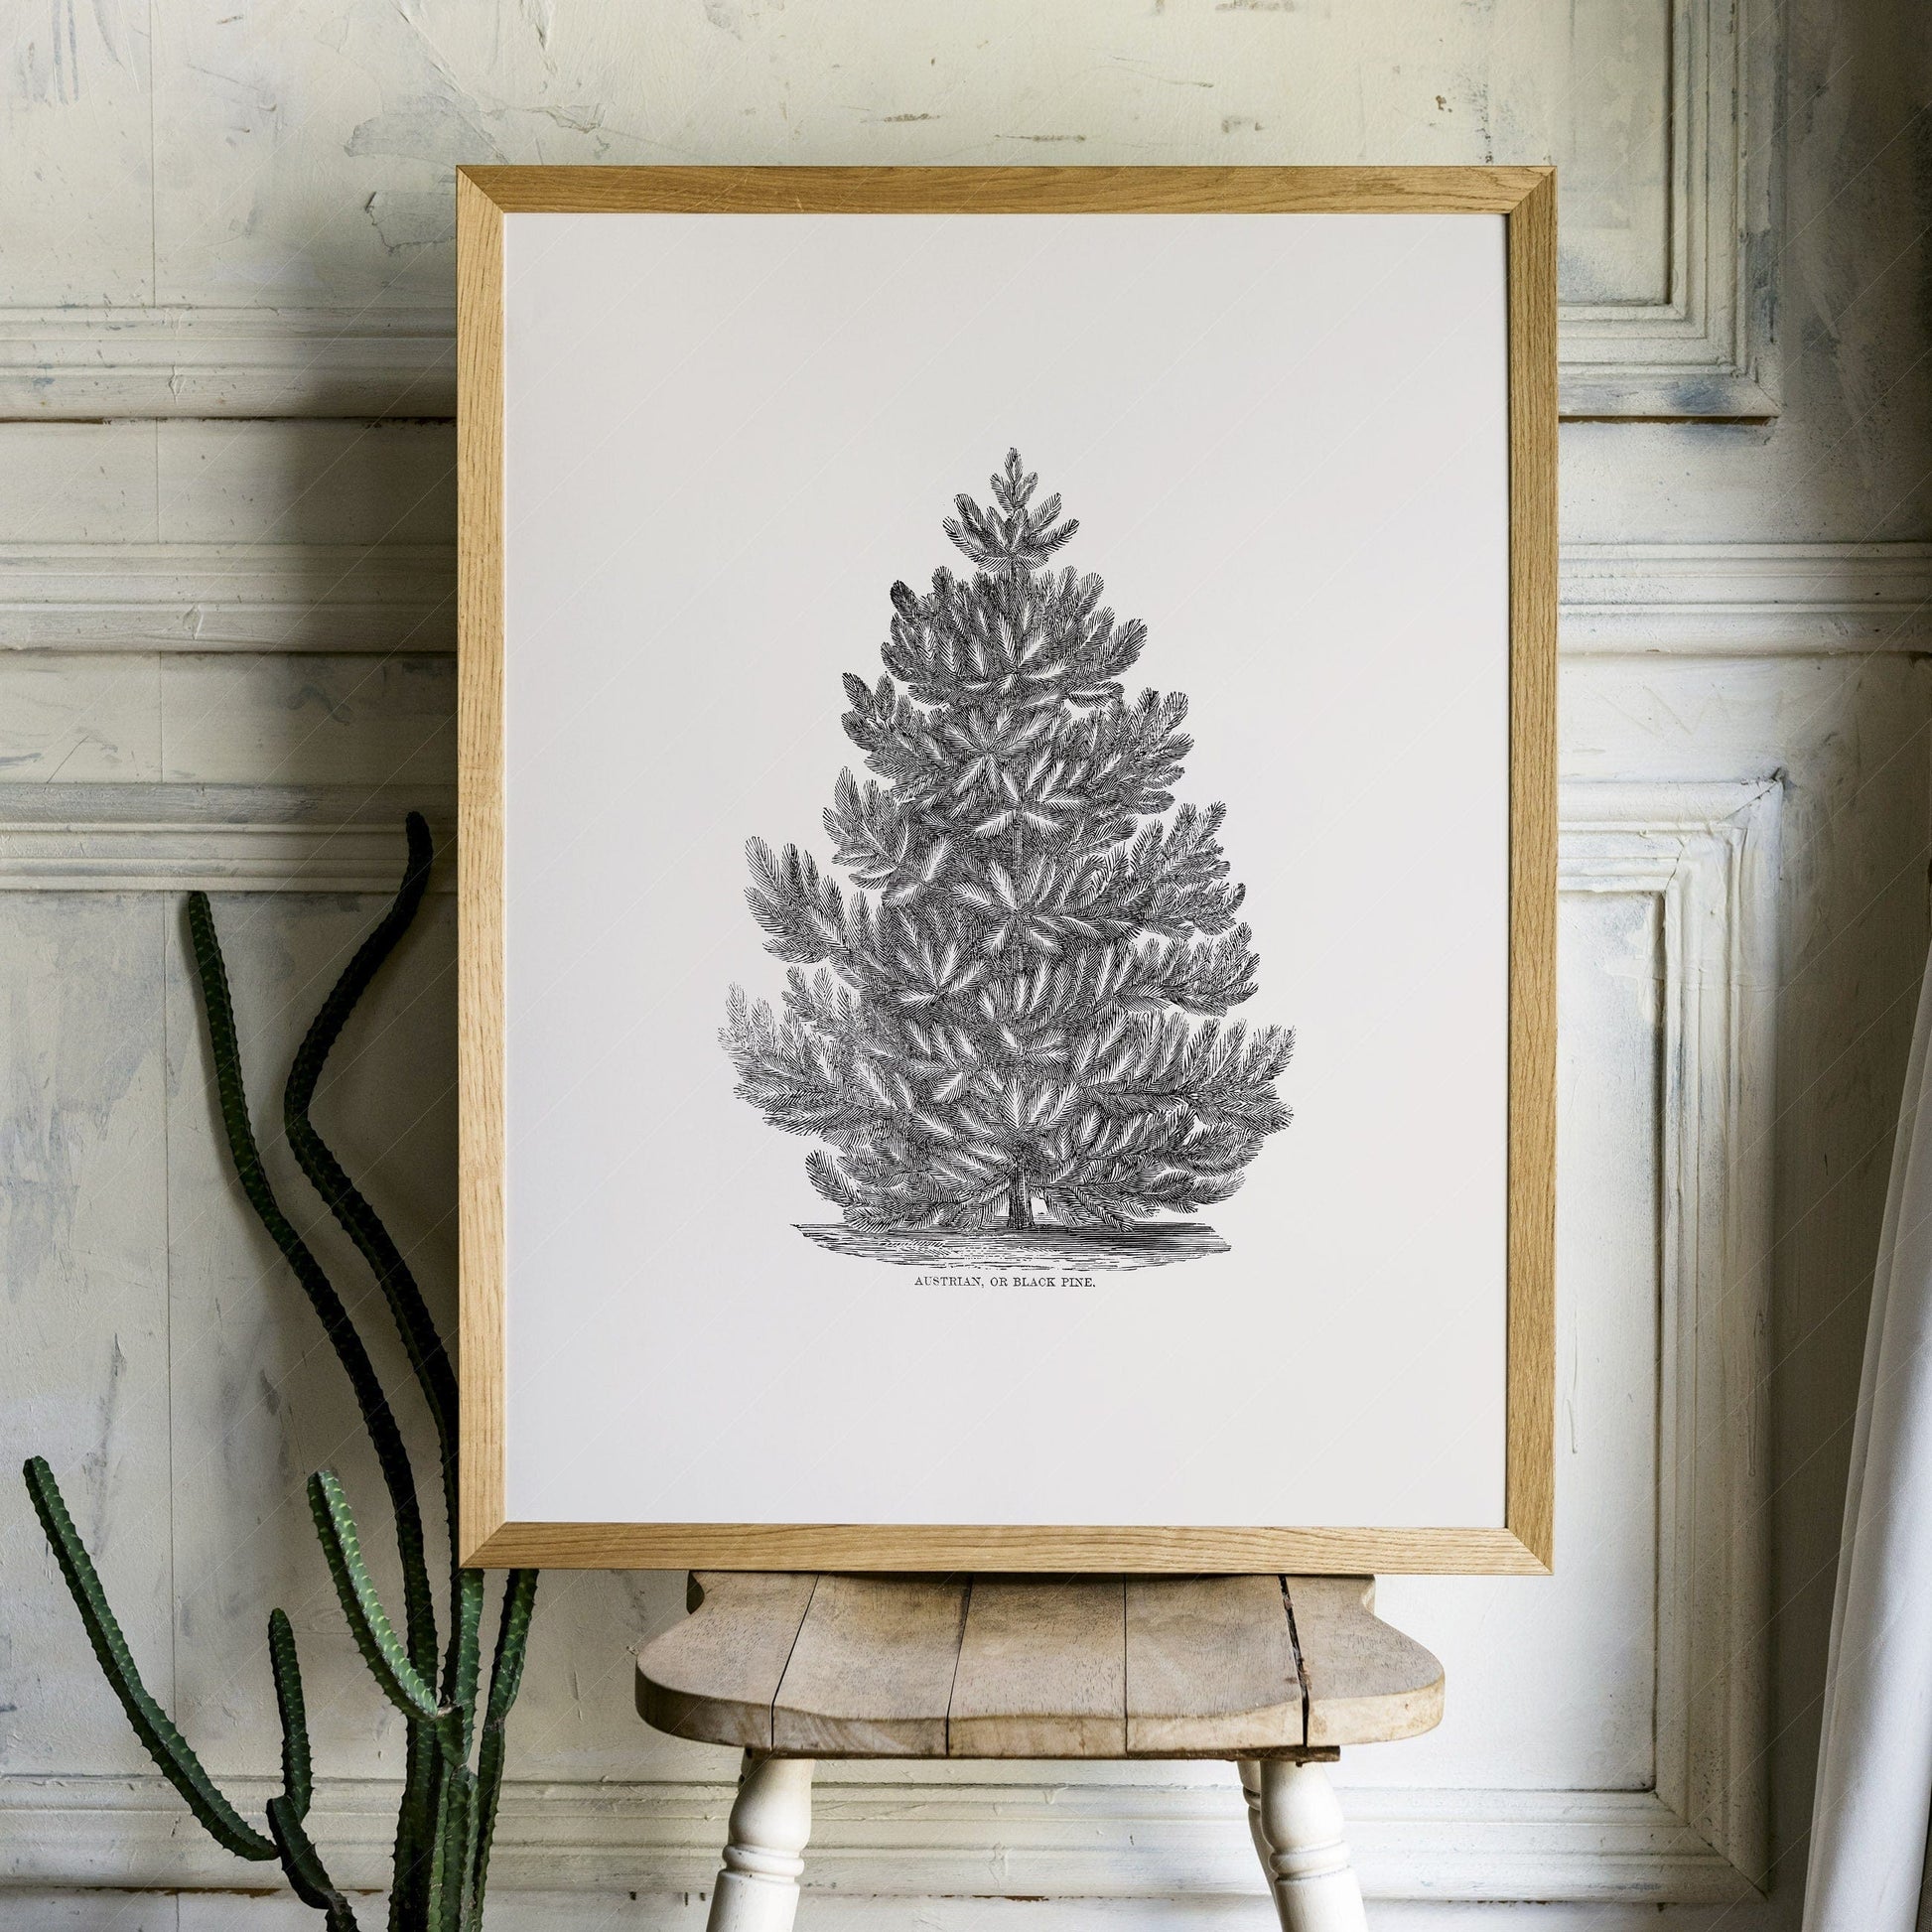 Home Poster Decor Black Pine Tree, Christmas Wall Decor, Forest Poster, Norway Spruce, Botanical Print, Winter Art, Vintage Gift, Nordic Forest, Canada Trees